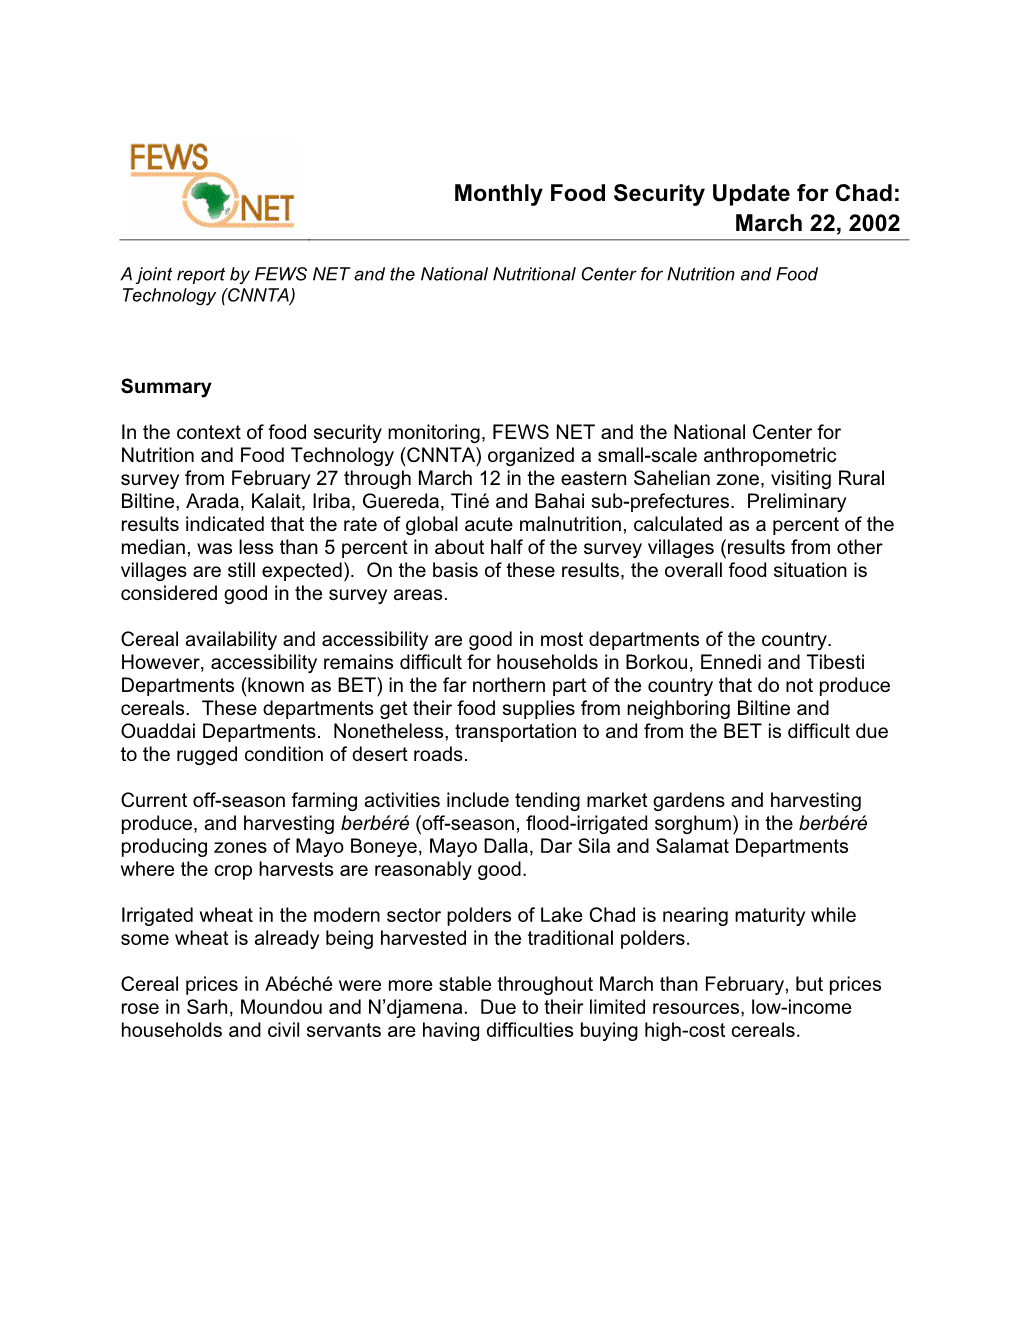 Monthly Food Security Update for Chad: March 22, 2002